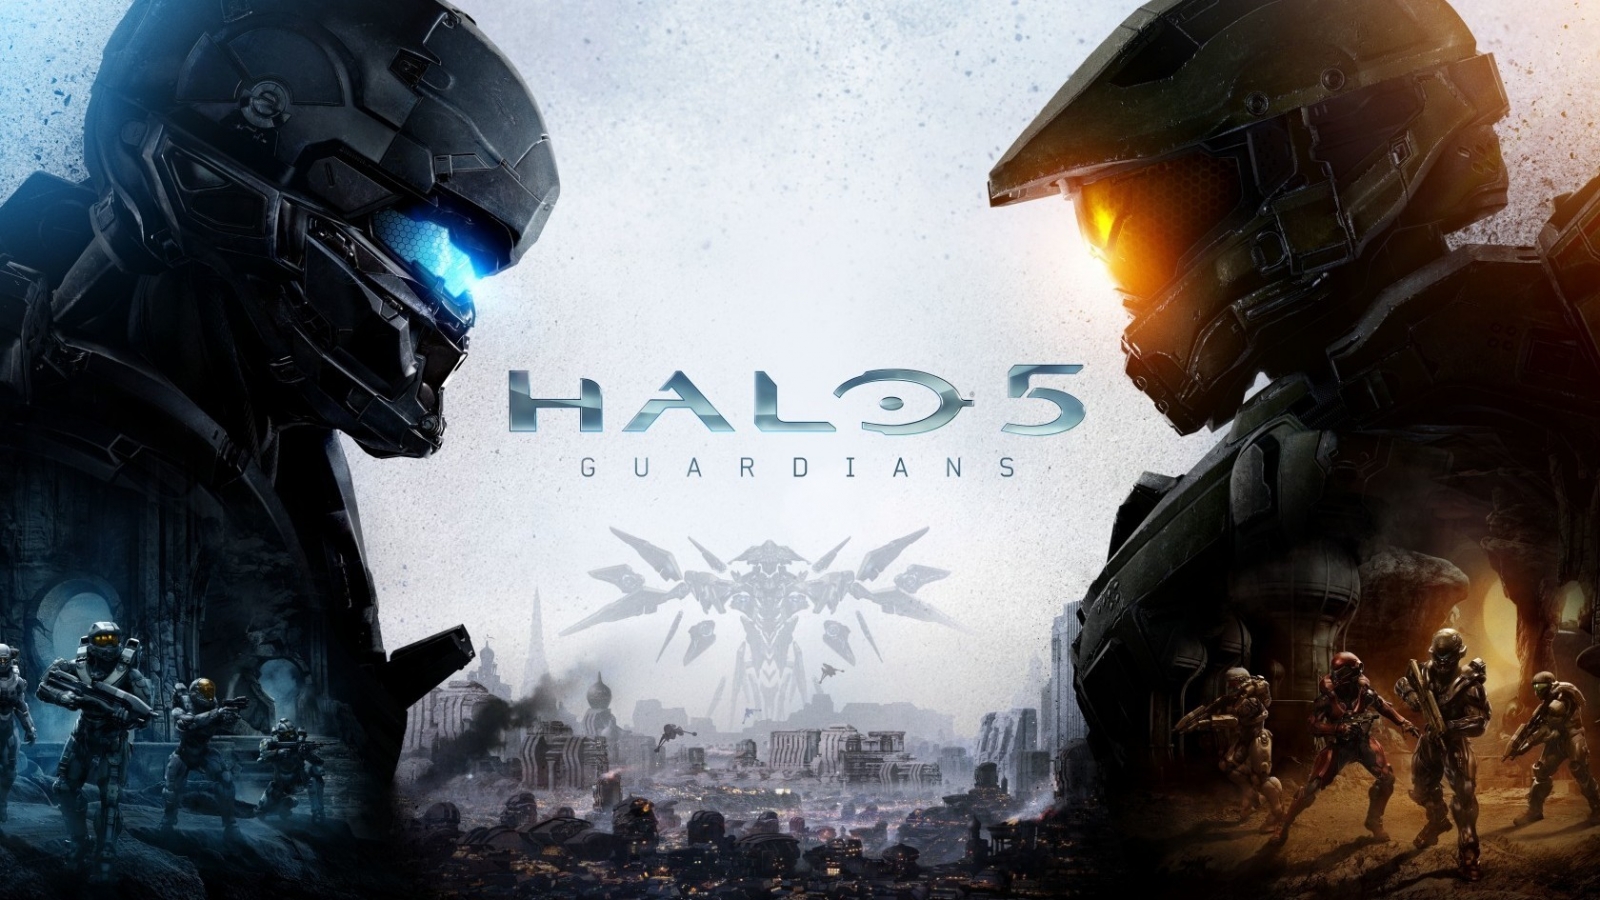 Halo 5 Guardians Game for 1600 x 900 HDTV resolution